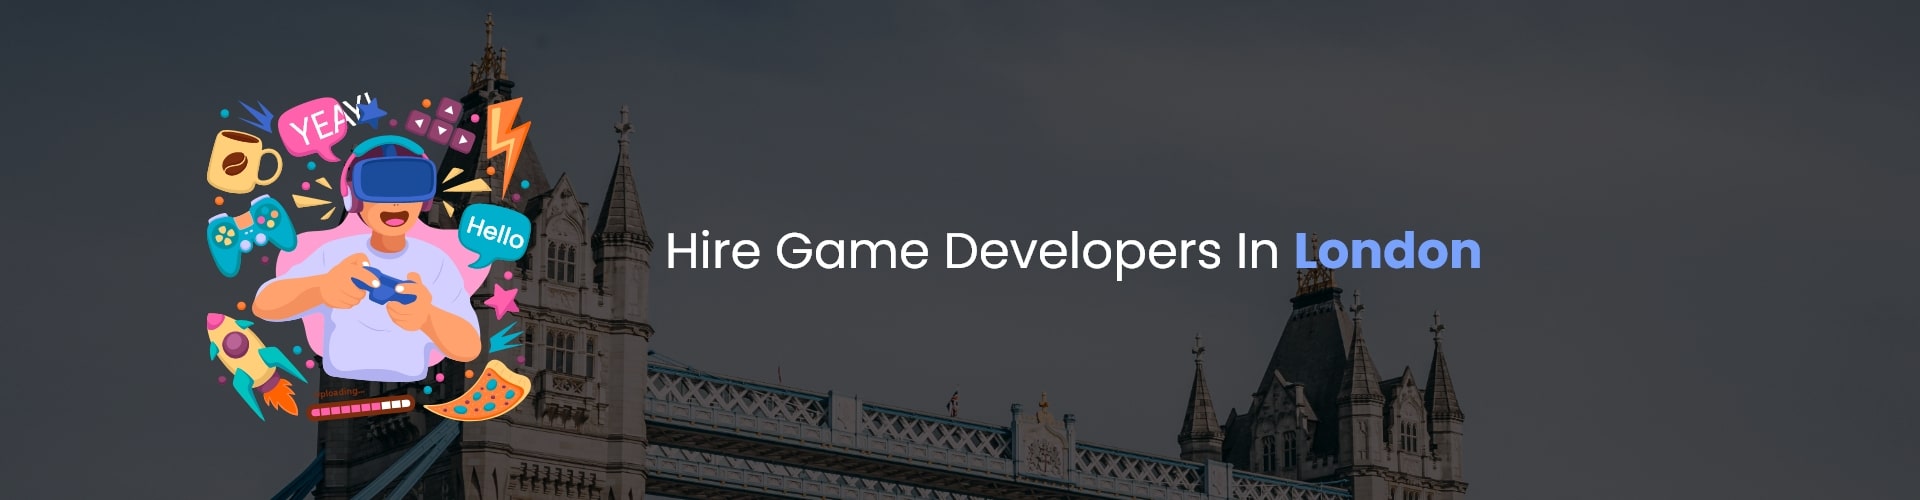 hire game developers in london